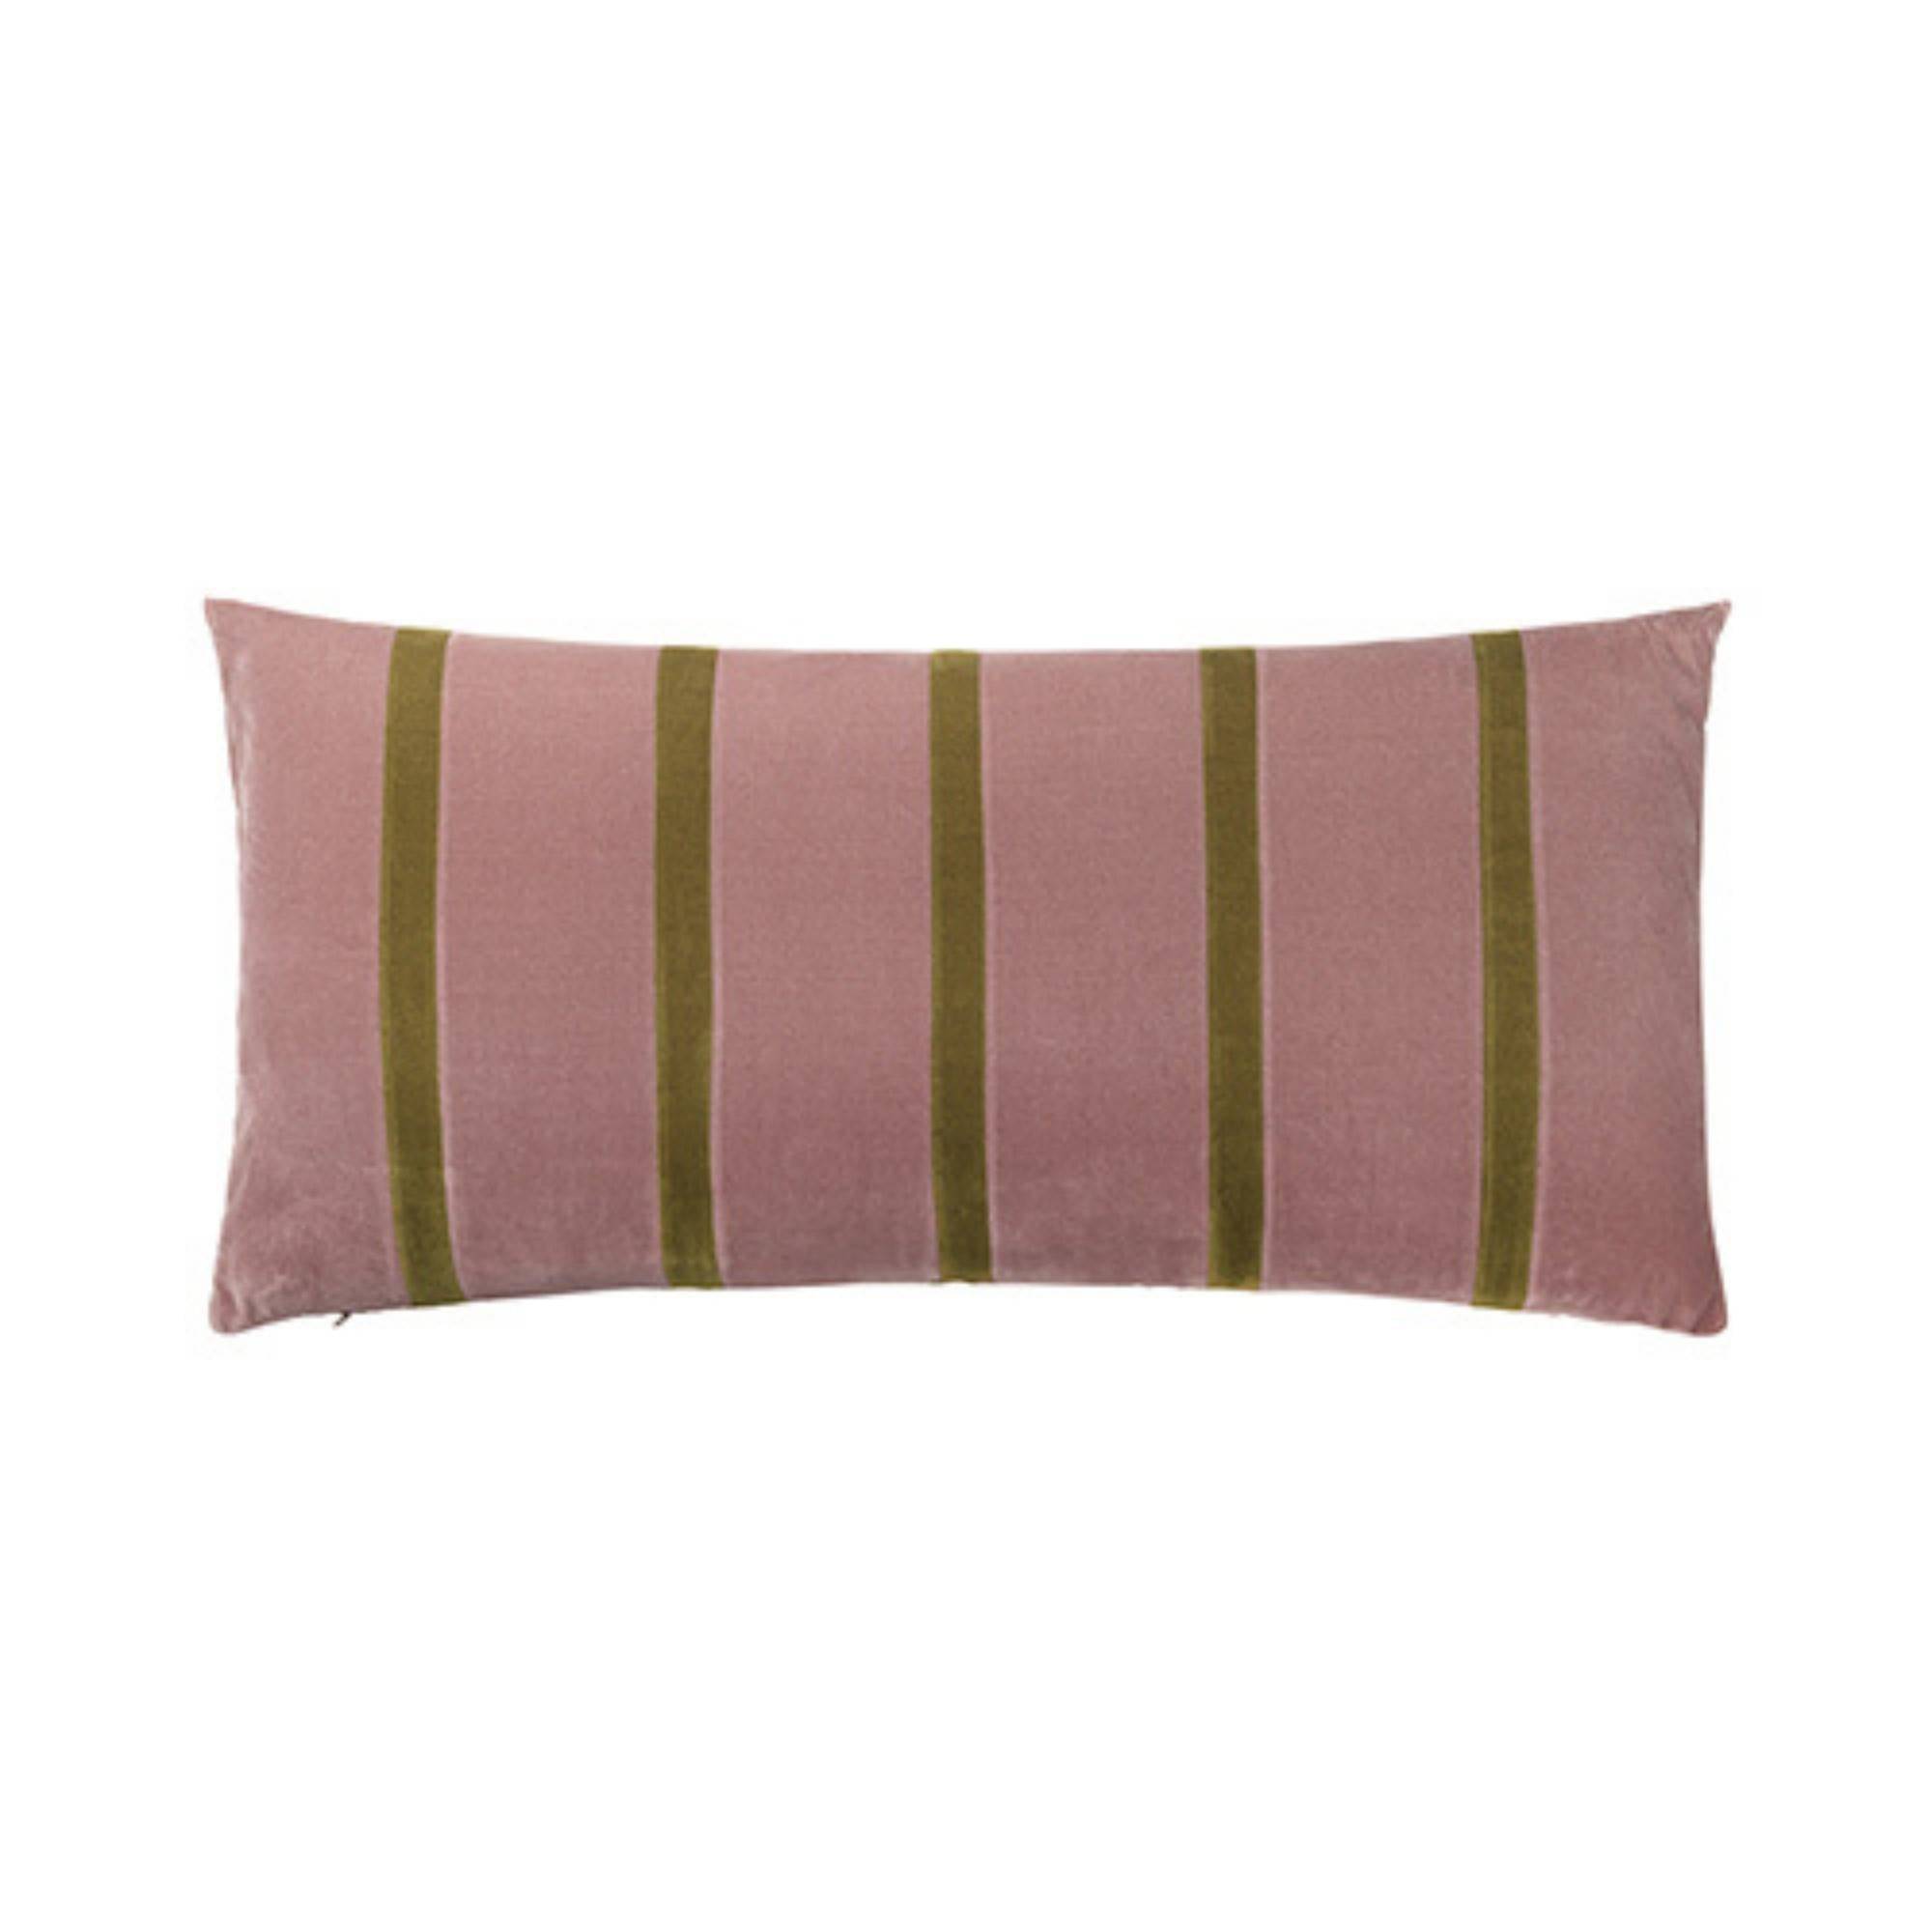 Pippa Cushion - Old Rose & Willow - THAT COOL LIVING